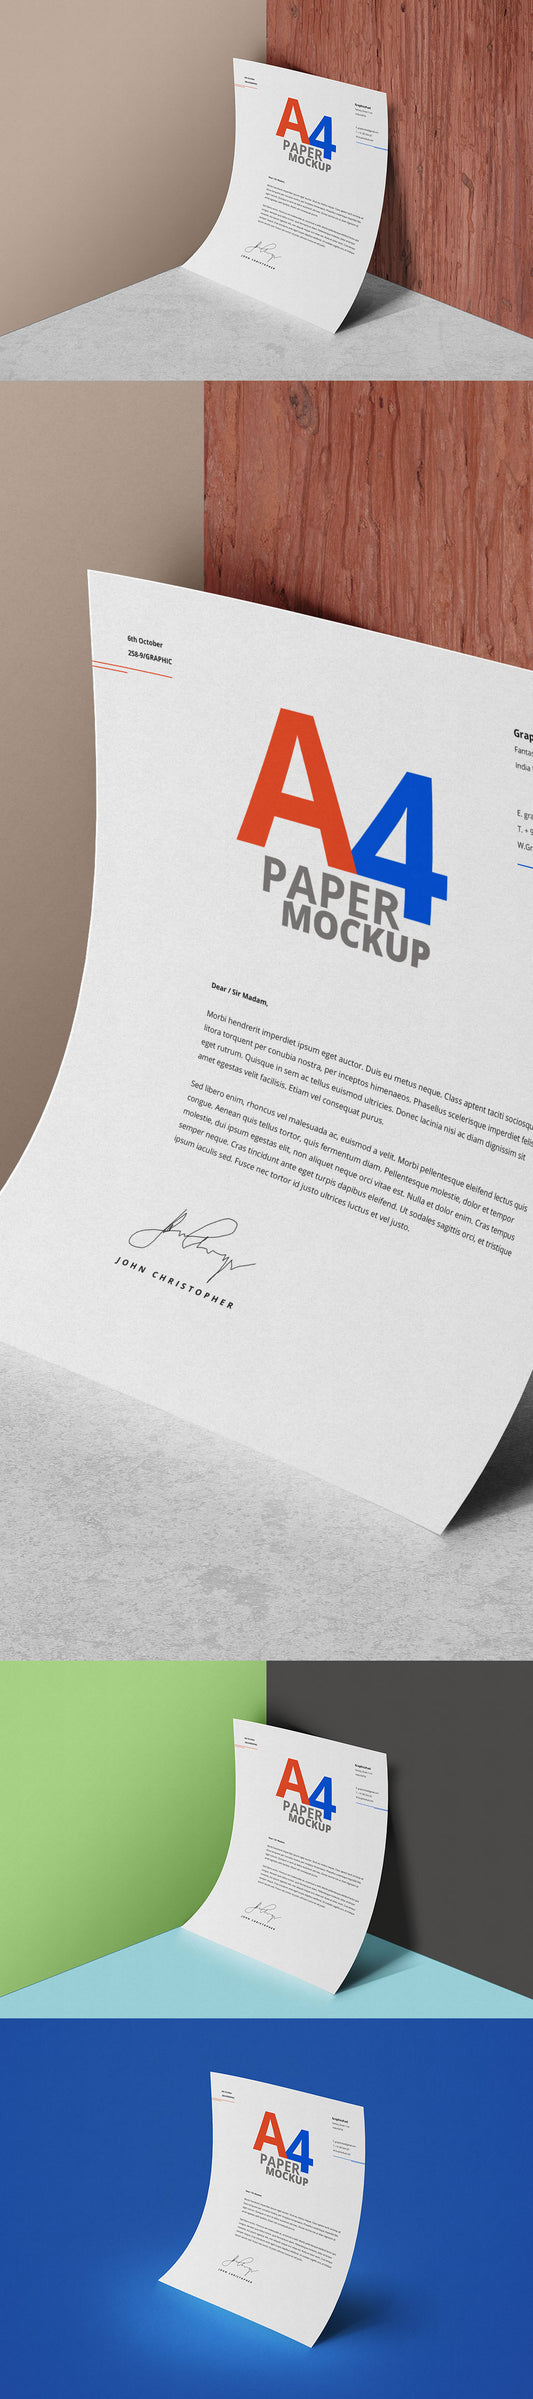 Free White and Clean A4 Paper Mockup PSD